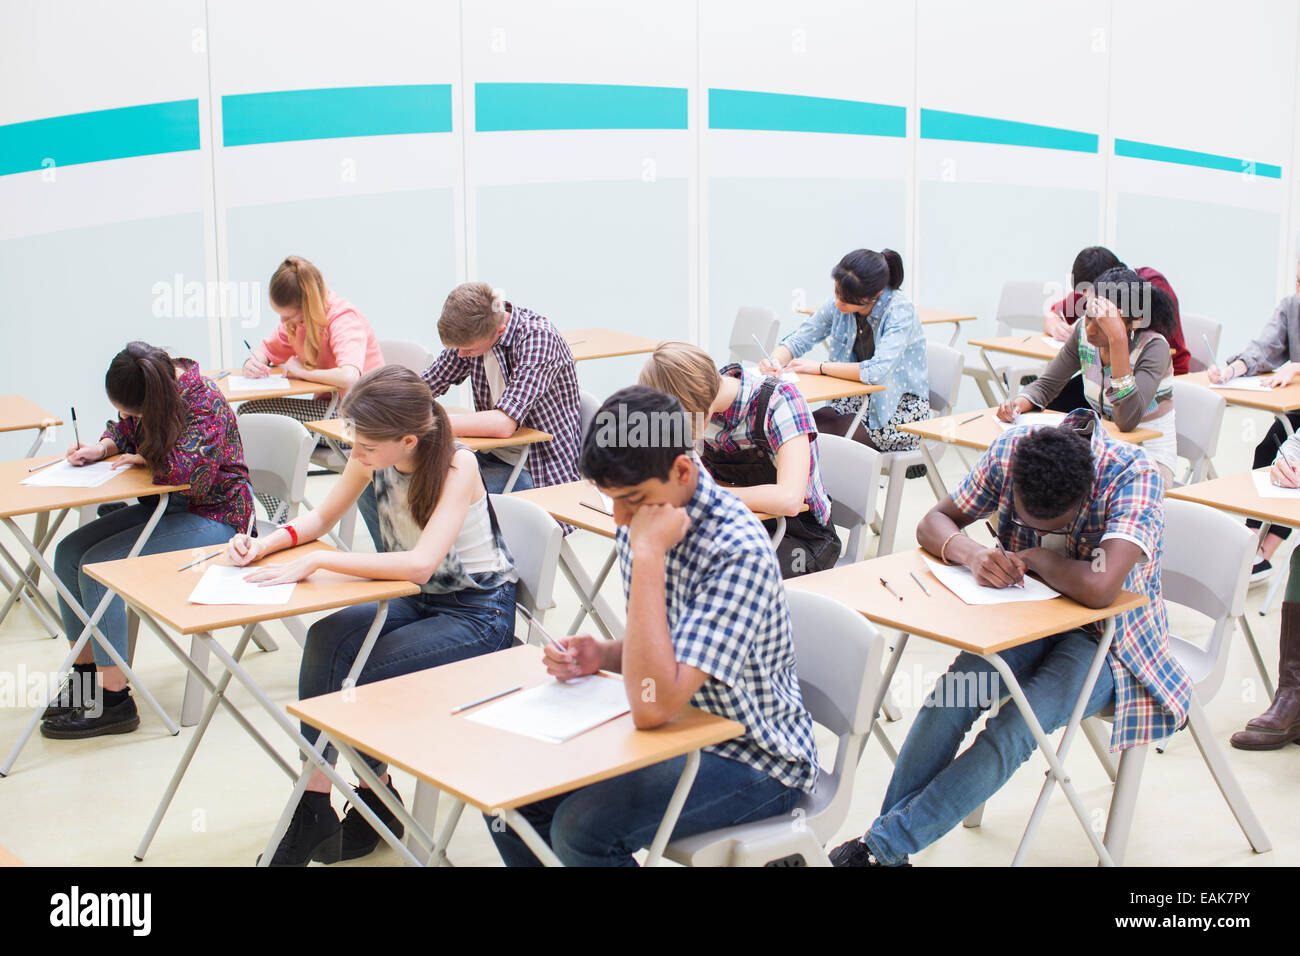 Students writing their GCSE examination in classroom Stock Photo